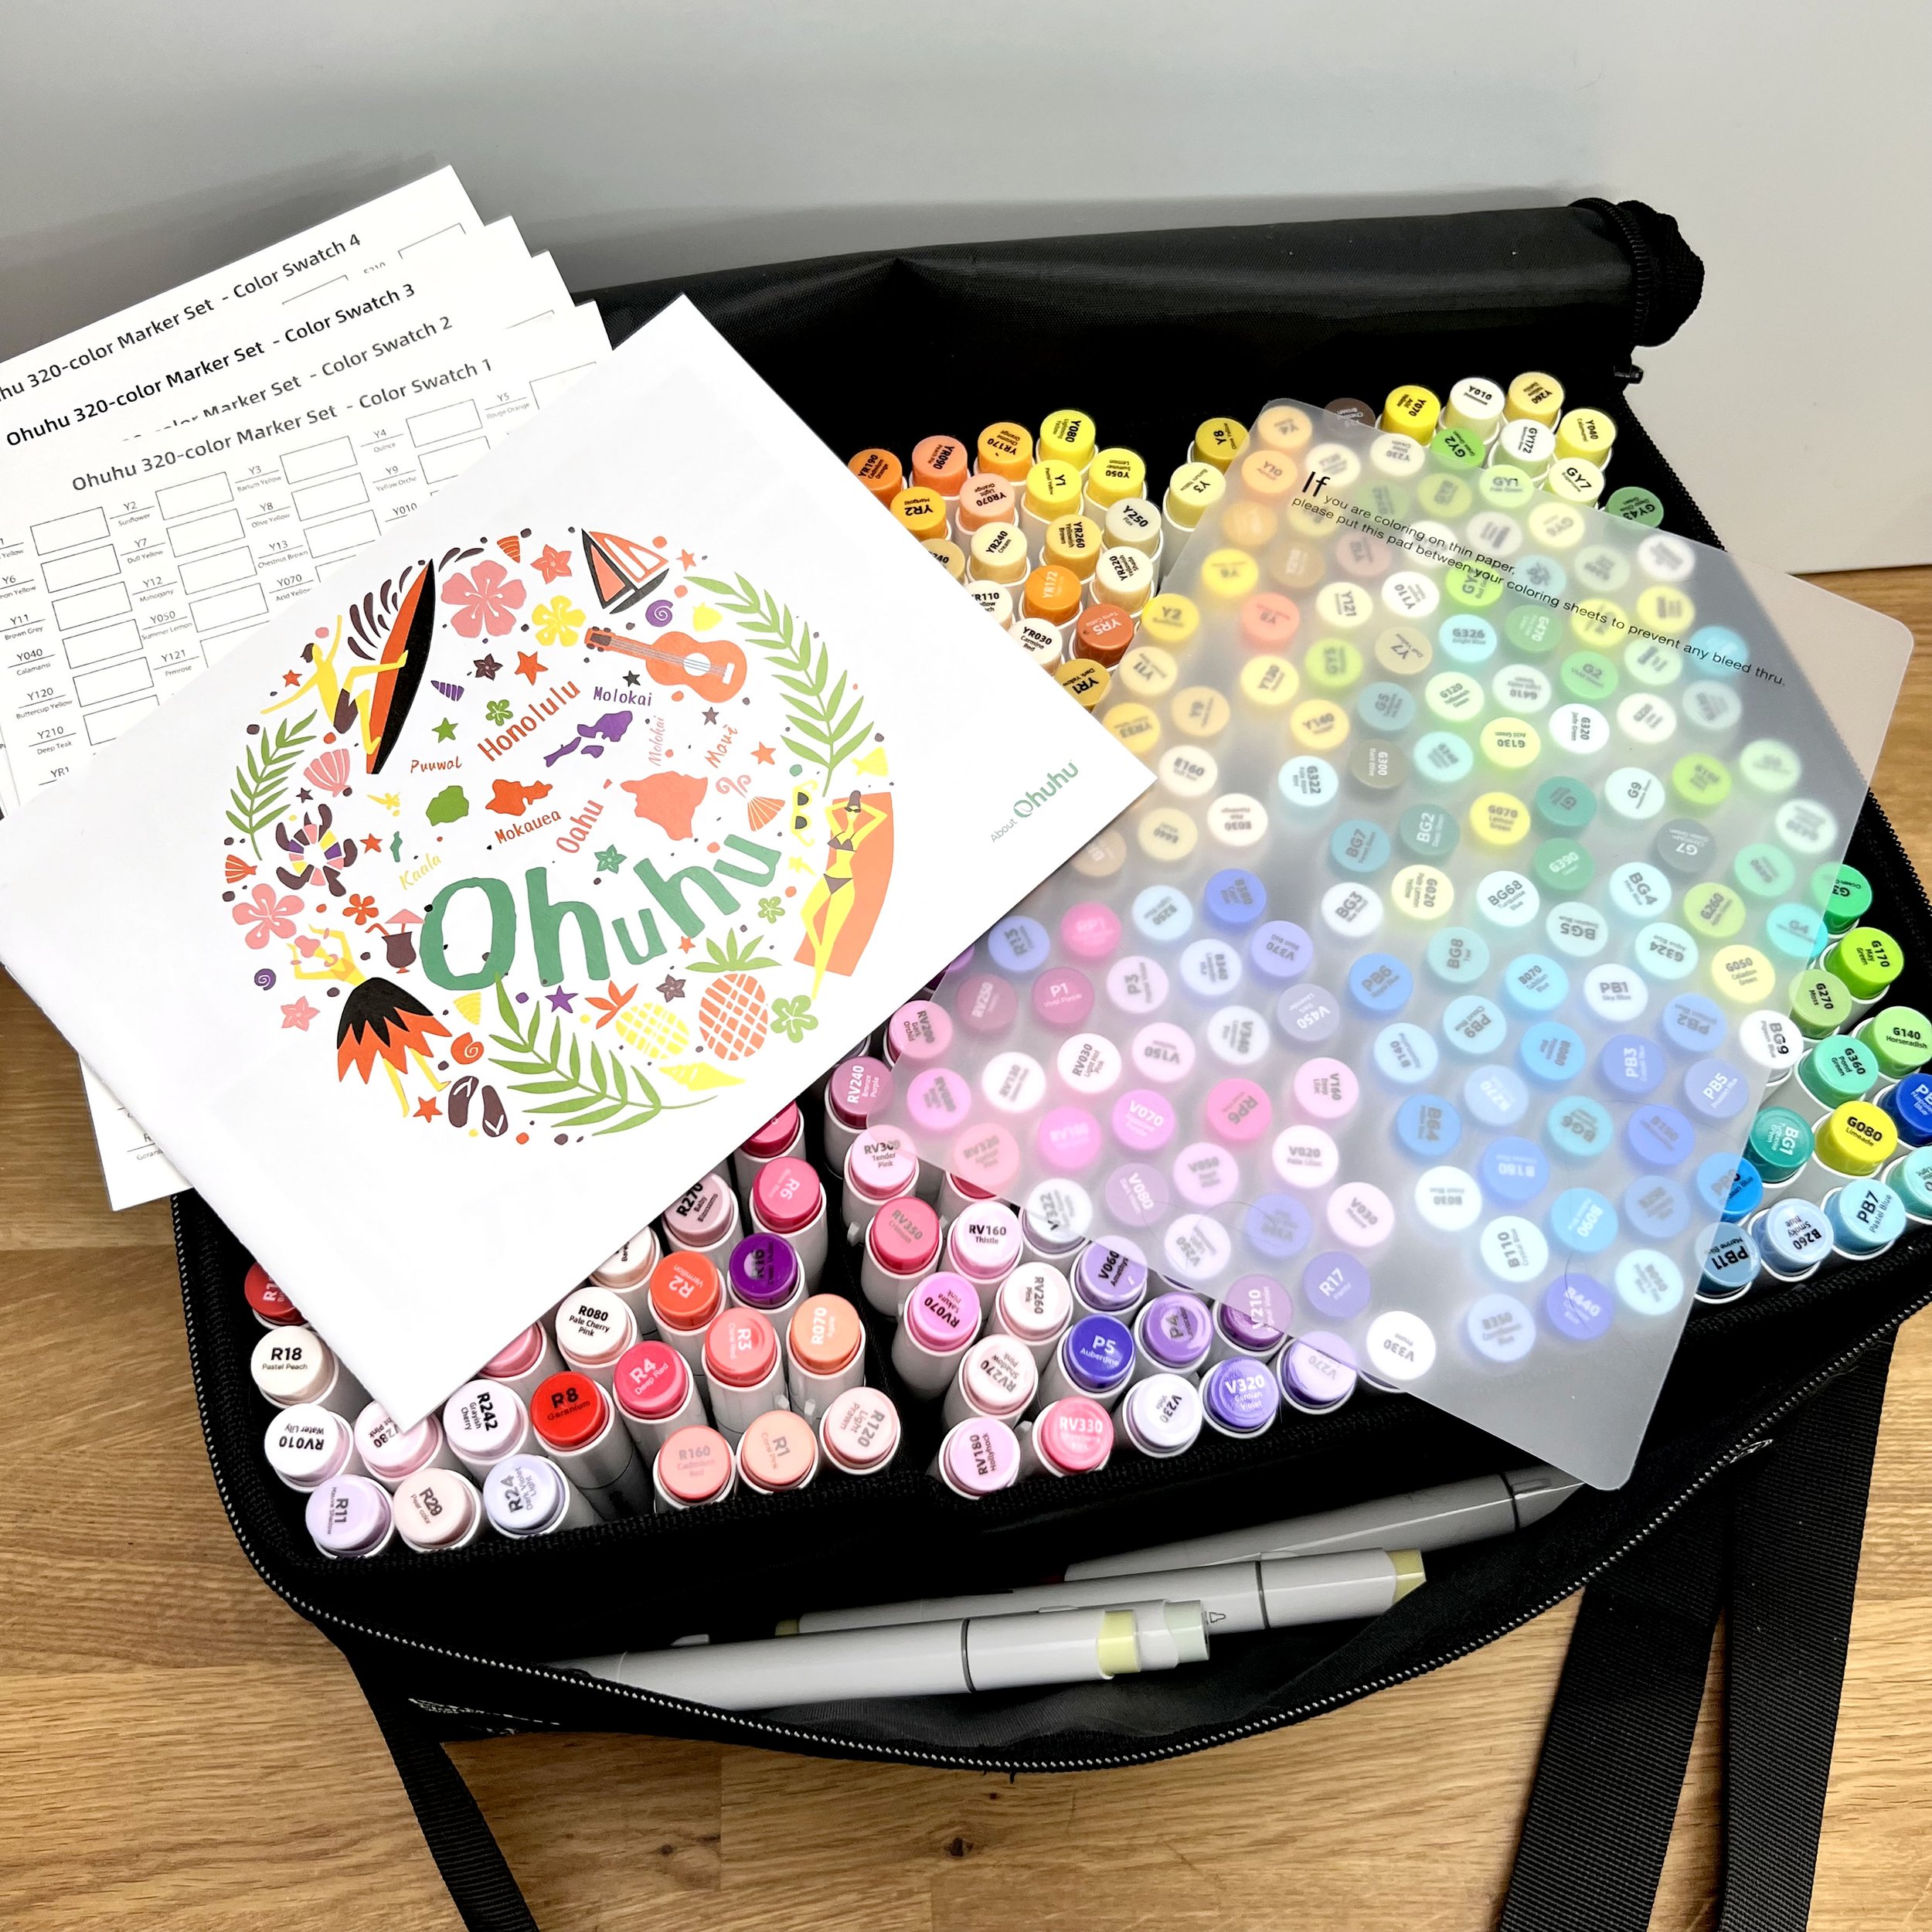 Unboxing Ohuhu Markers: Ordering and Packaging Review — Marker Novice